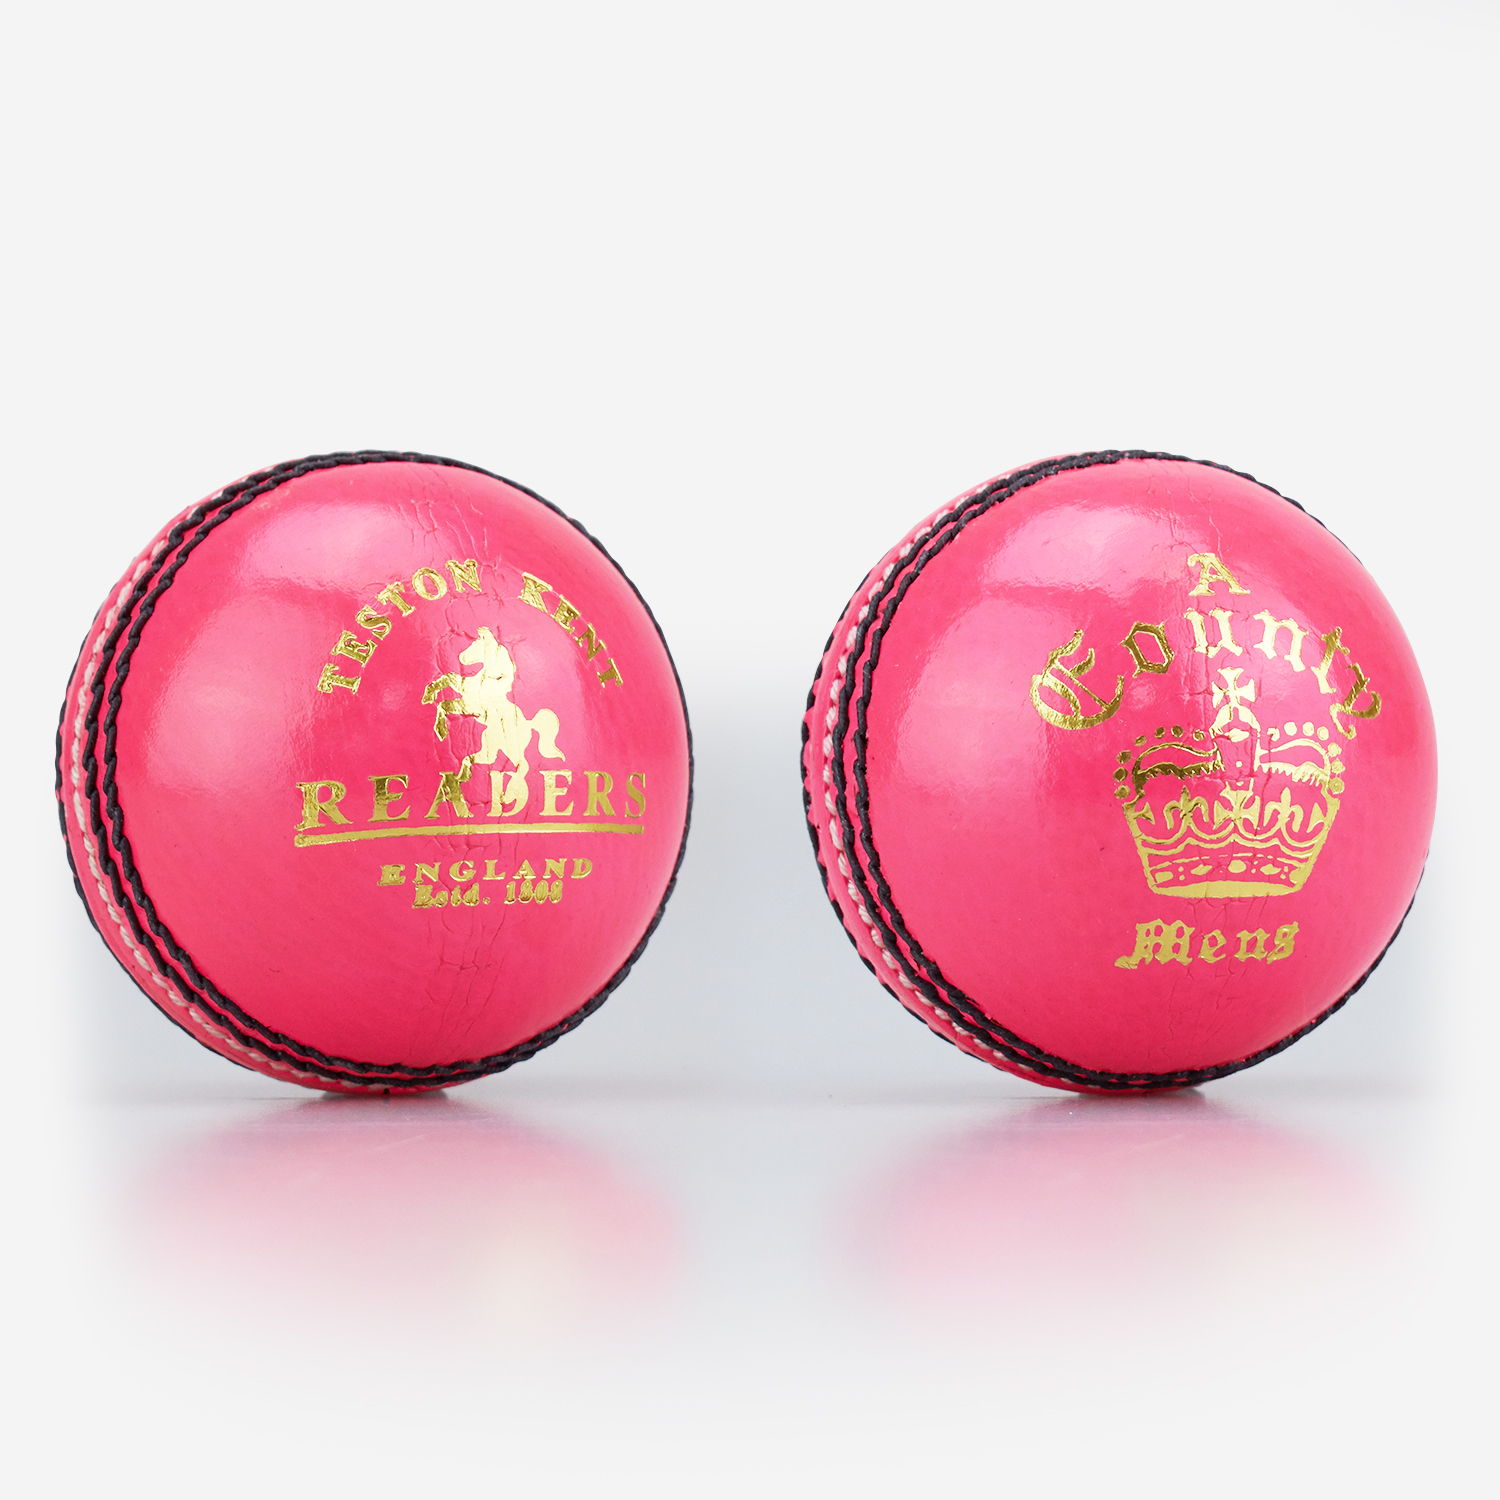 Readers County Crown Pink Cricket Ball